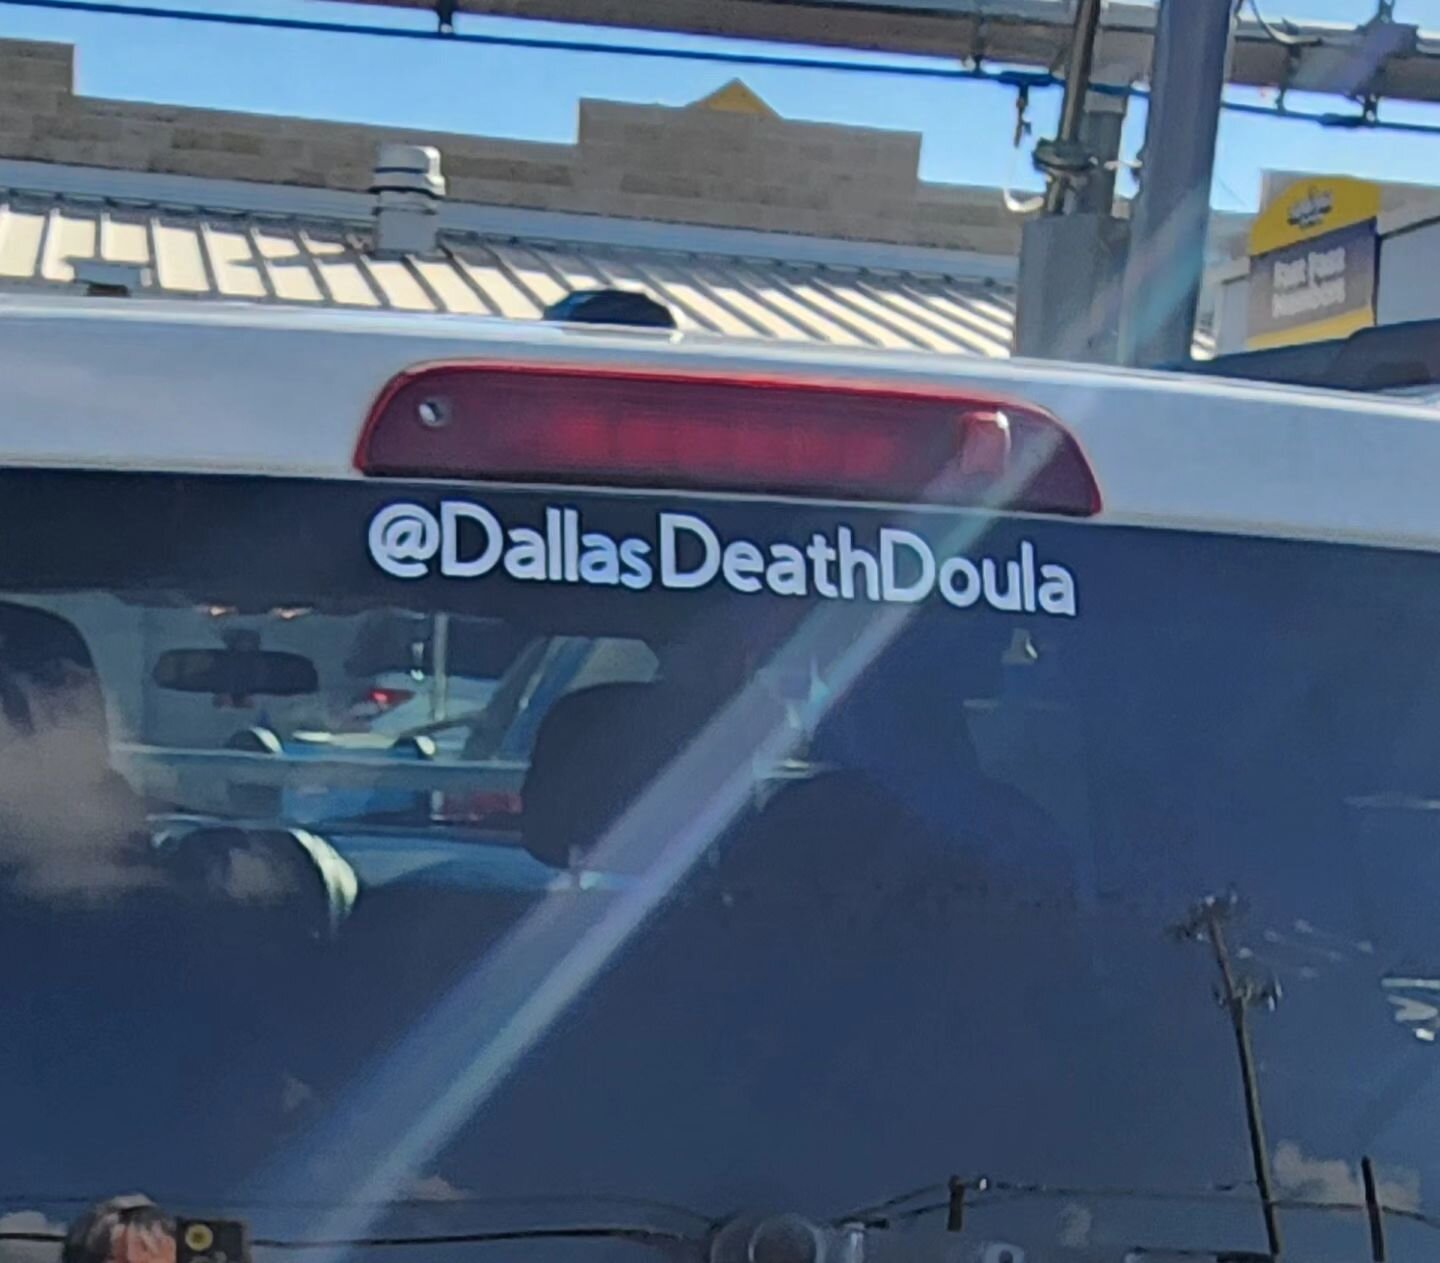 People can now find me driving down the road. (Note to self: drive better!)
.
.
.
.
.
.
.
#deathdoula #dallas #onthegomarketing #marketingonthego